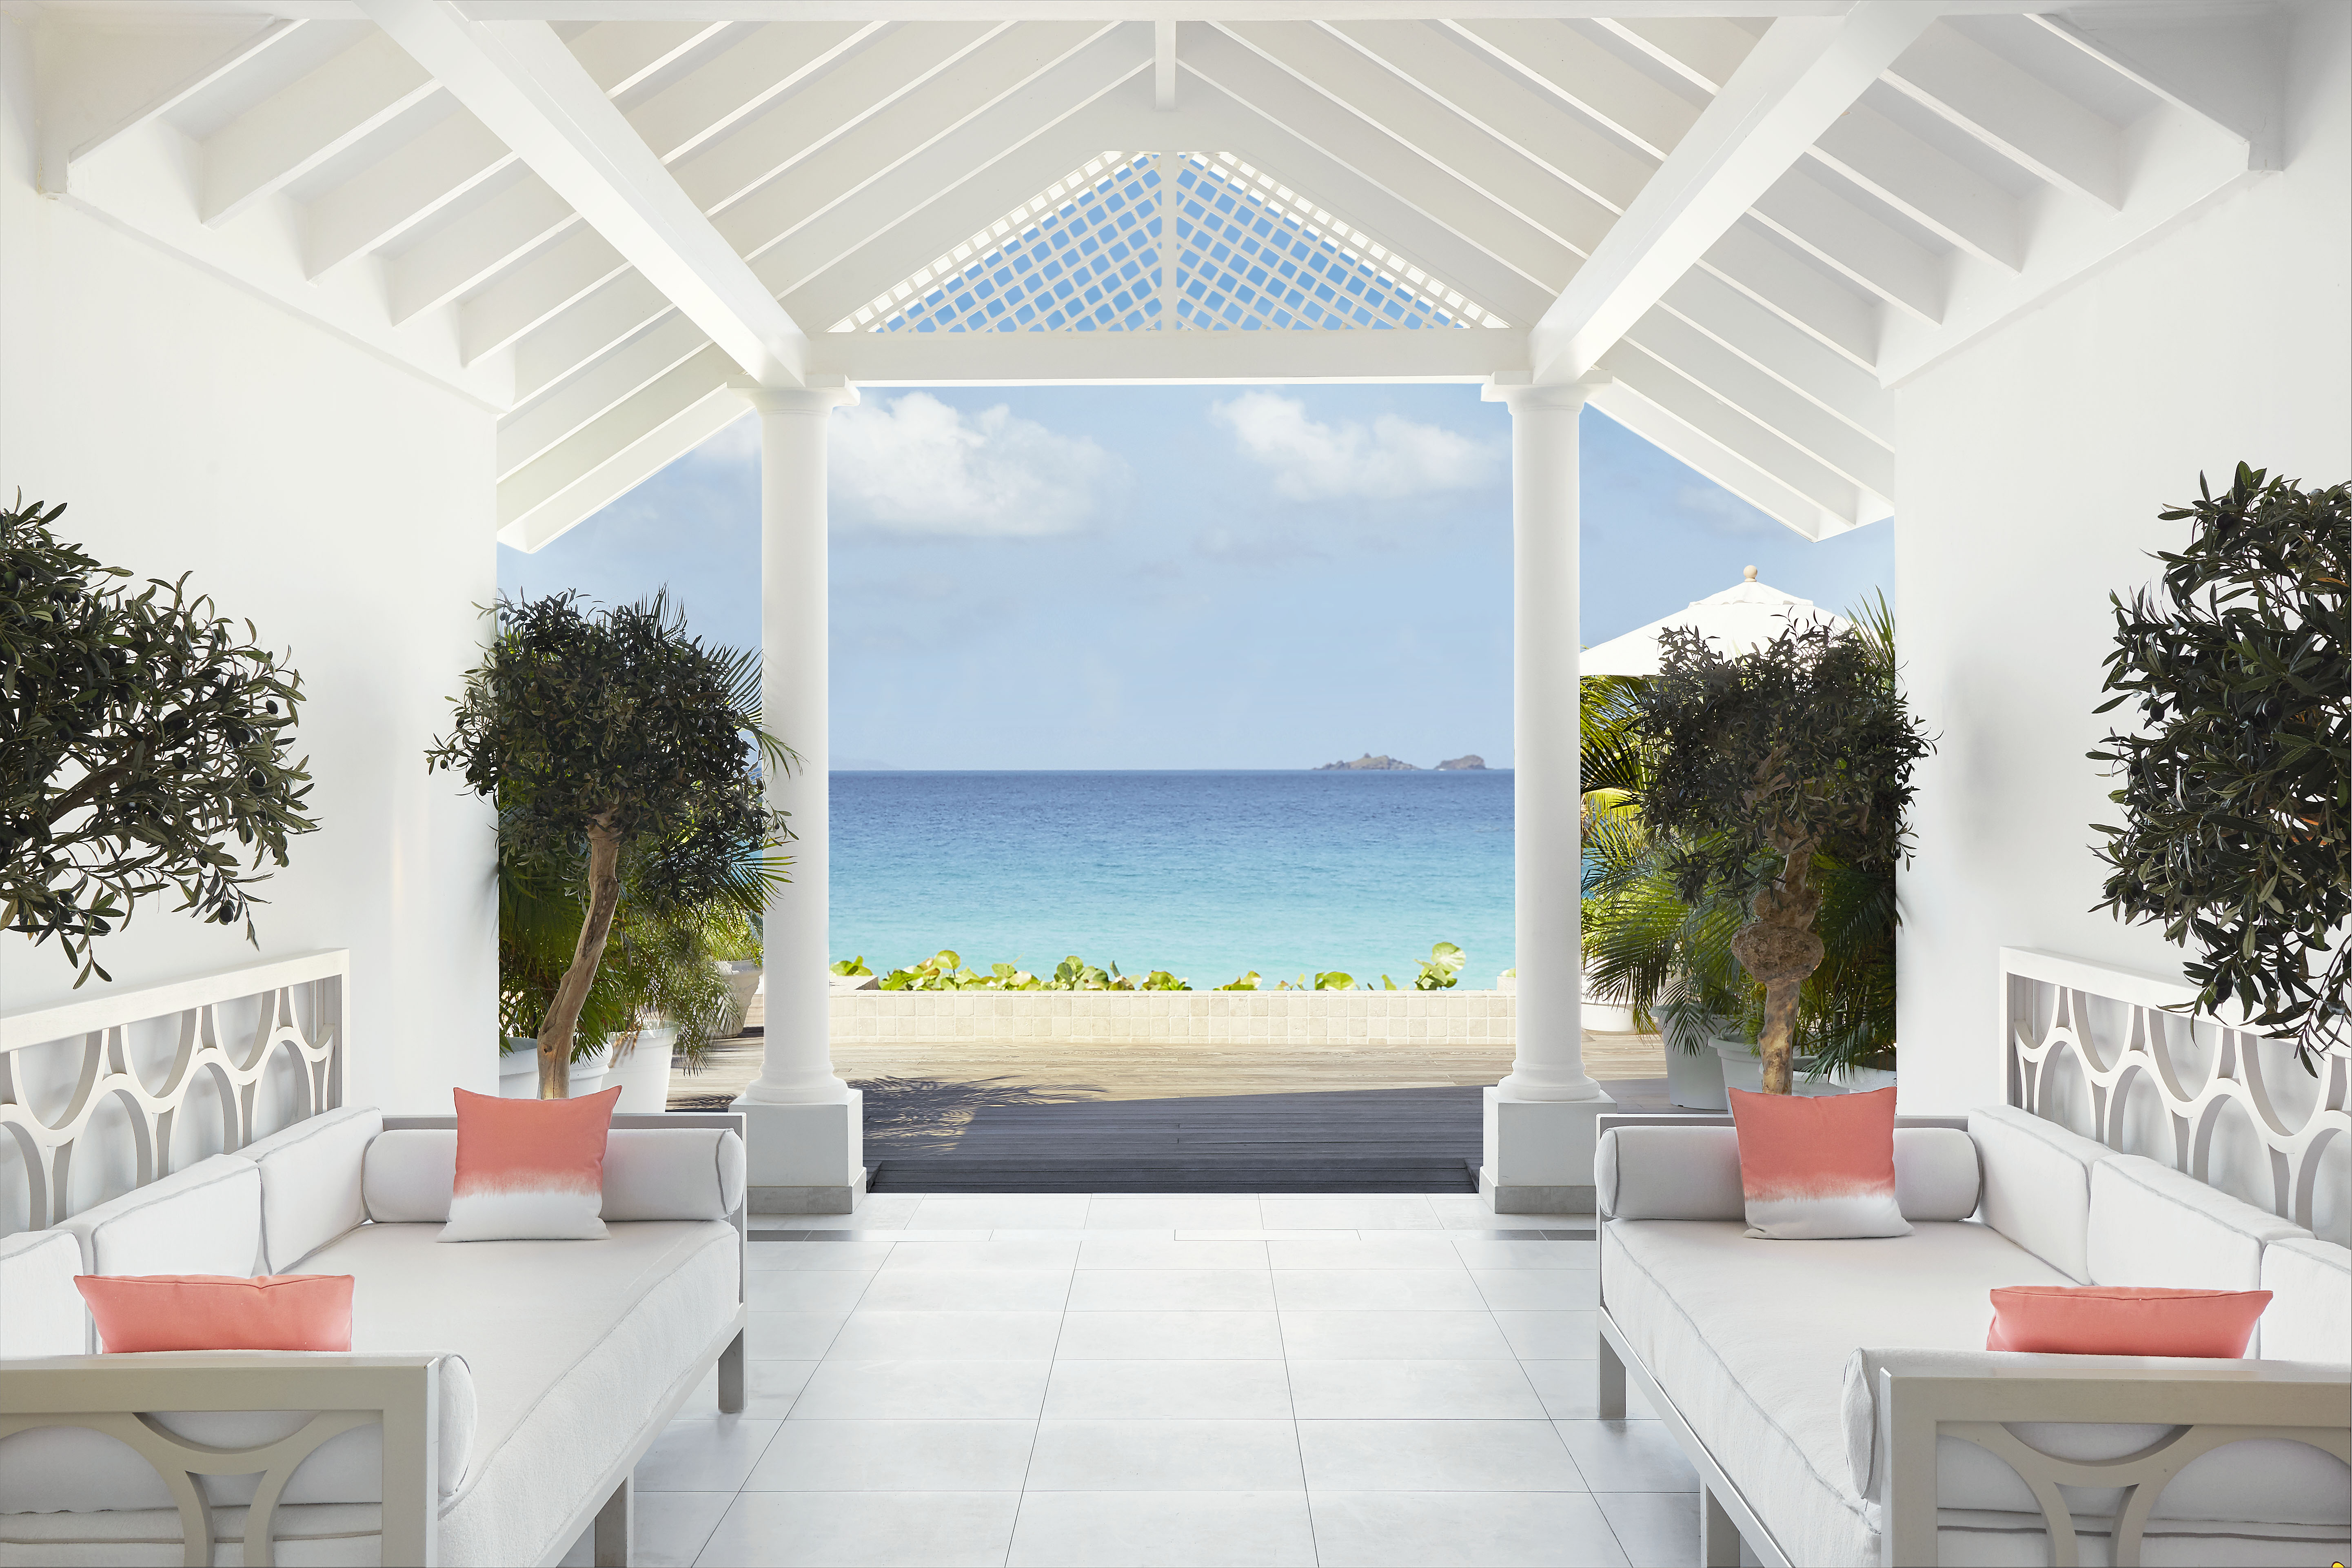 4 Amazing Hotels in St. Barth’s